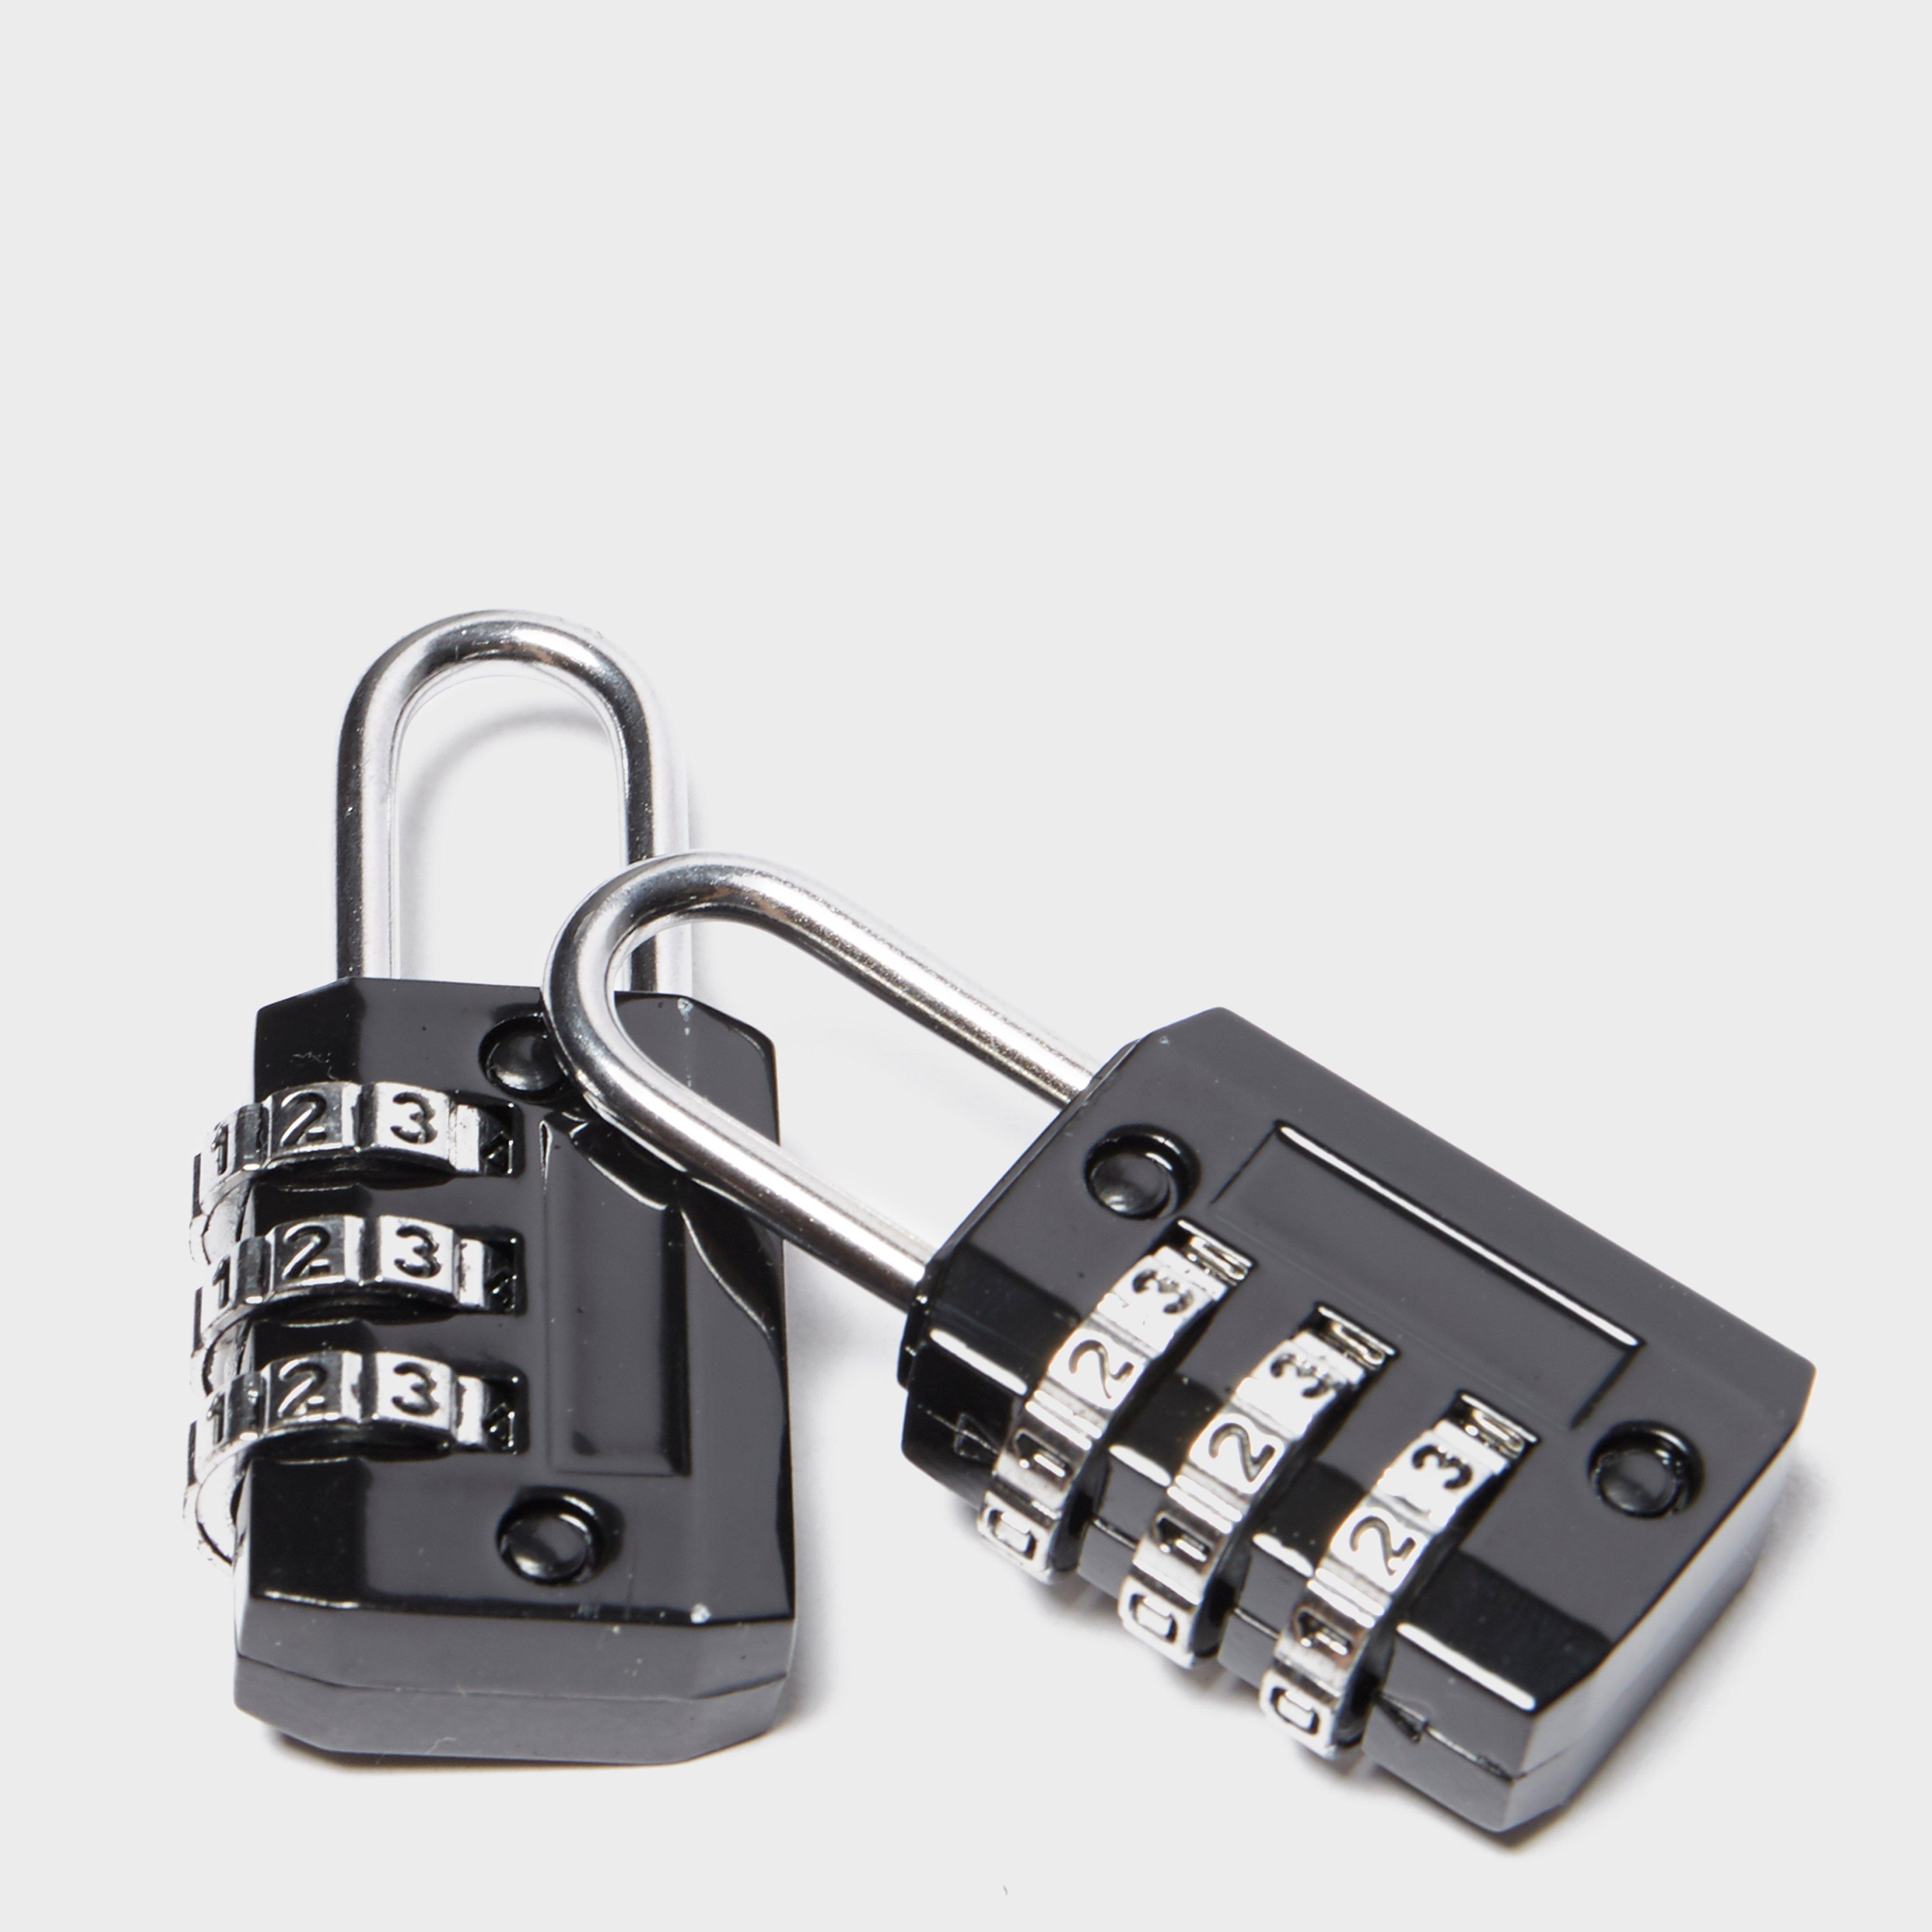 Technicals Set of 2 Combination Locks Review